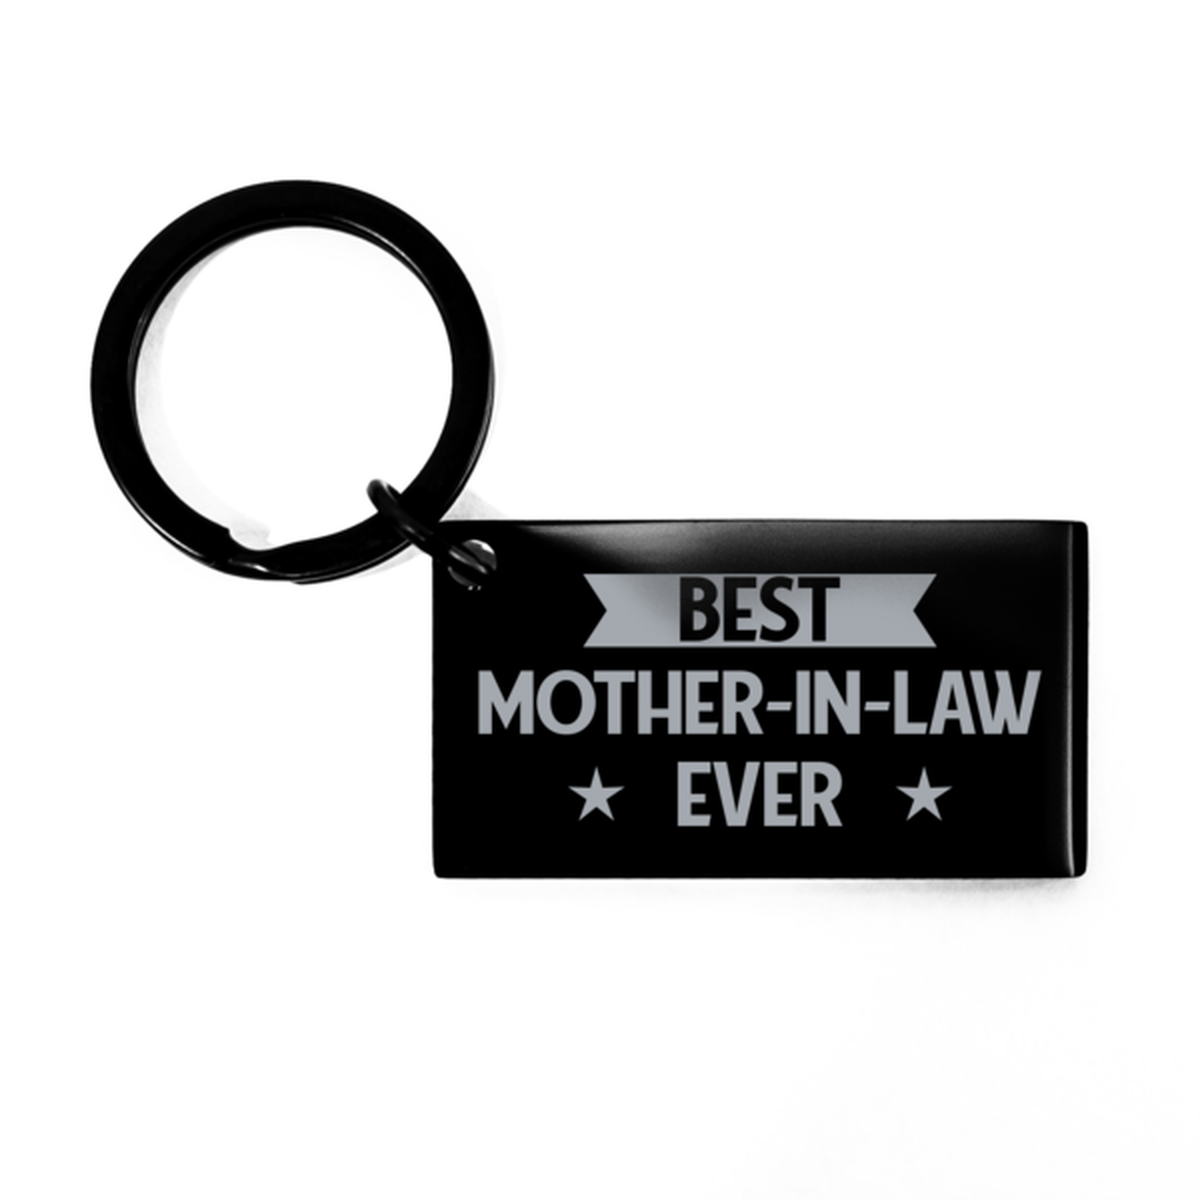 Best Mother-in-law Ever Mother-in-law Gifts, Funny Black Keychain For Mother-in-law, Birthday Engraved Keyring Presents For Women